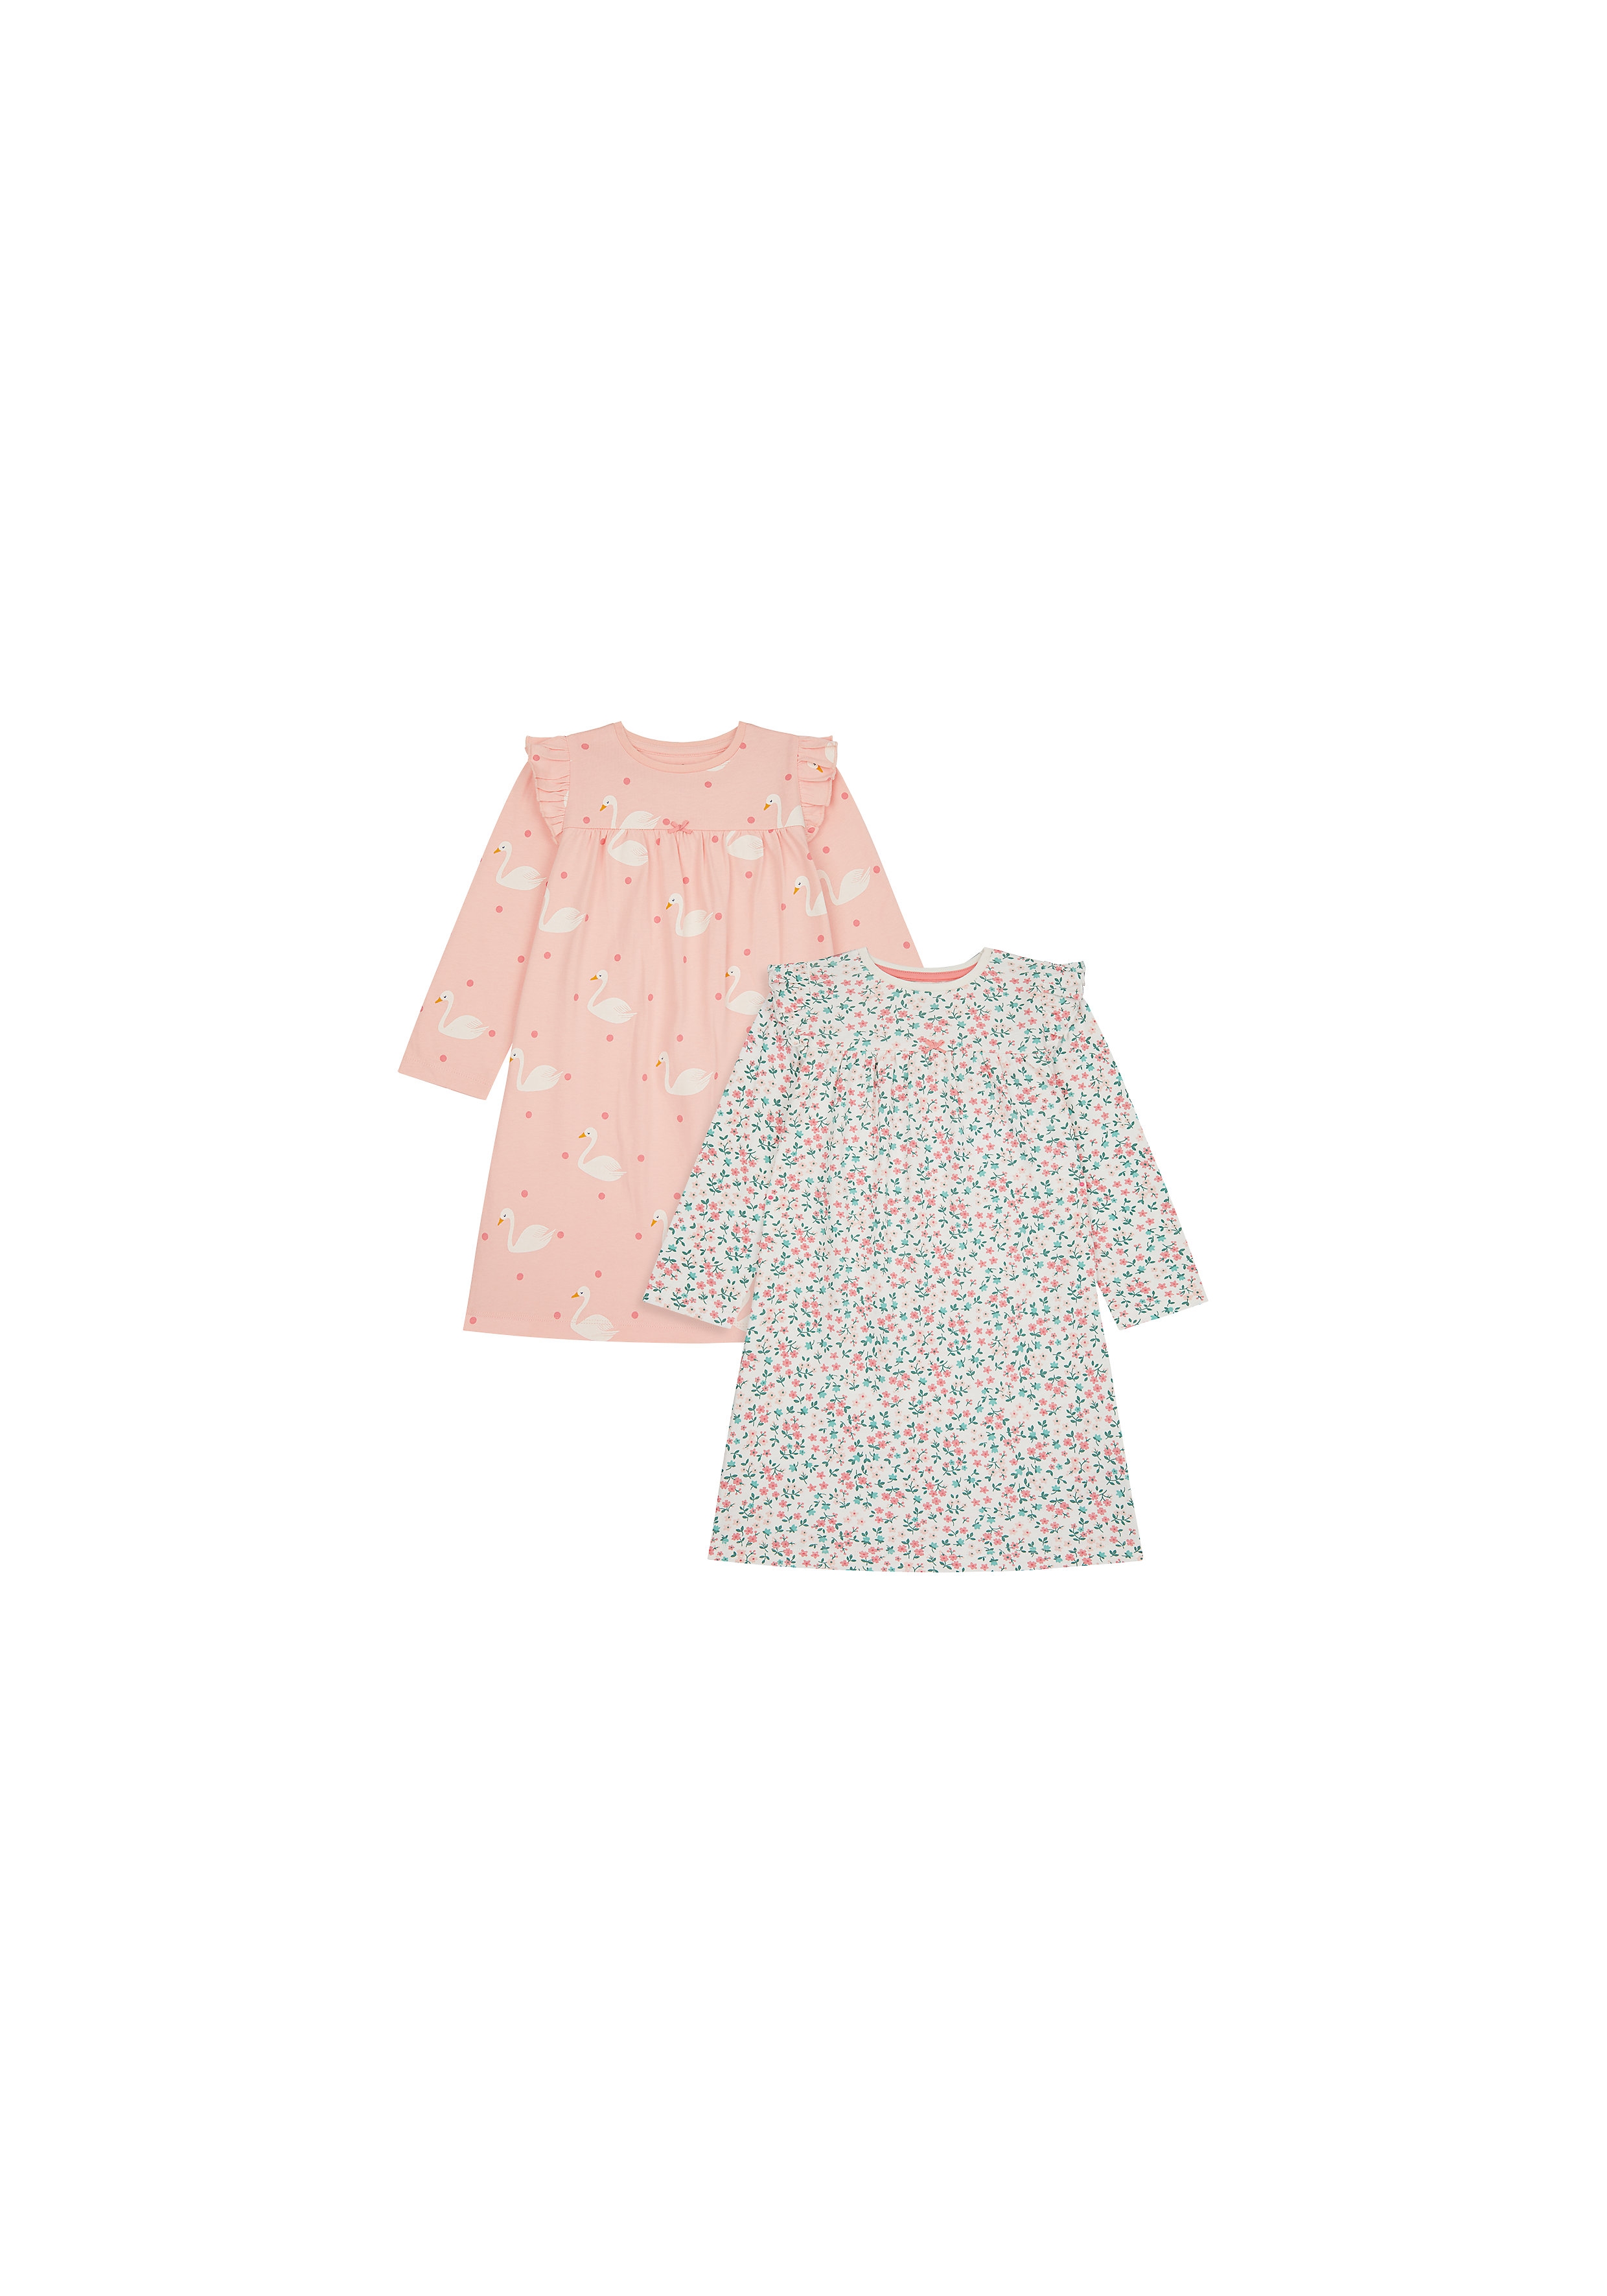 Mothercare | Girls Full Sleeves Nightdress Floral And Swan Print - Pack Of 2 - Pink White 0